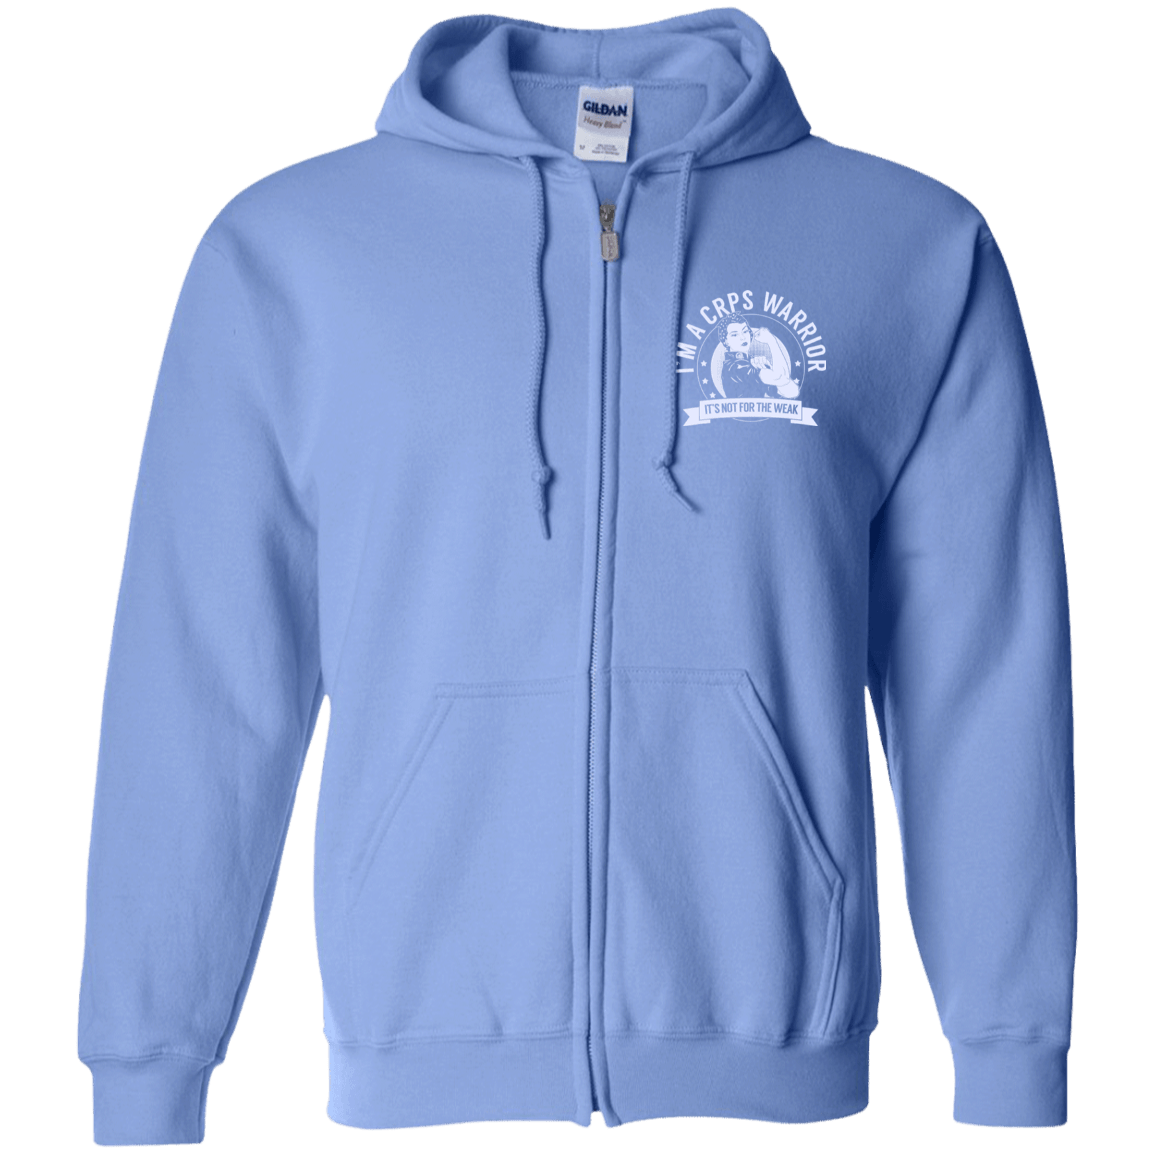 Complex Regional Pain Syndrome - CRPS Warrior NFTW Zip Up Hooded Sweatshirt - The Unchargeables